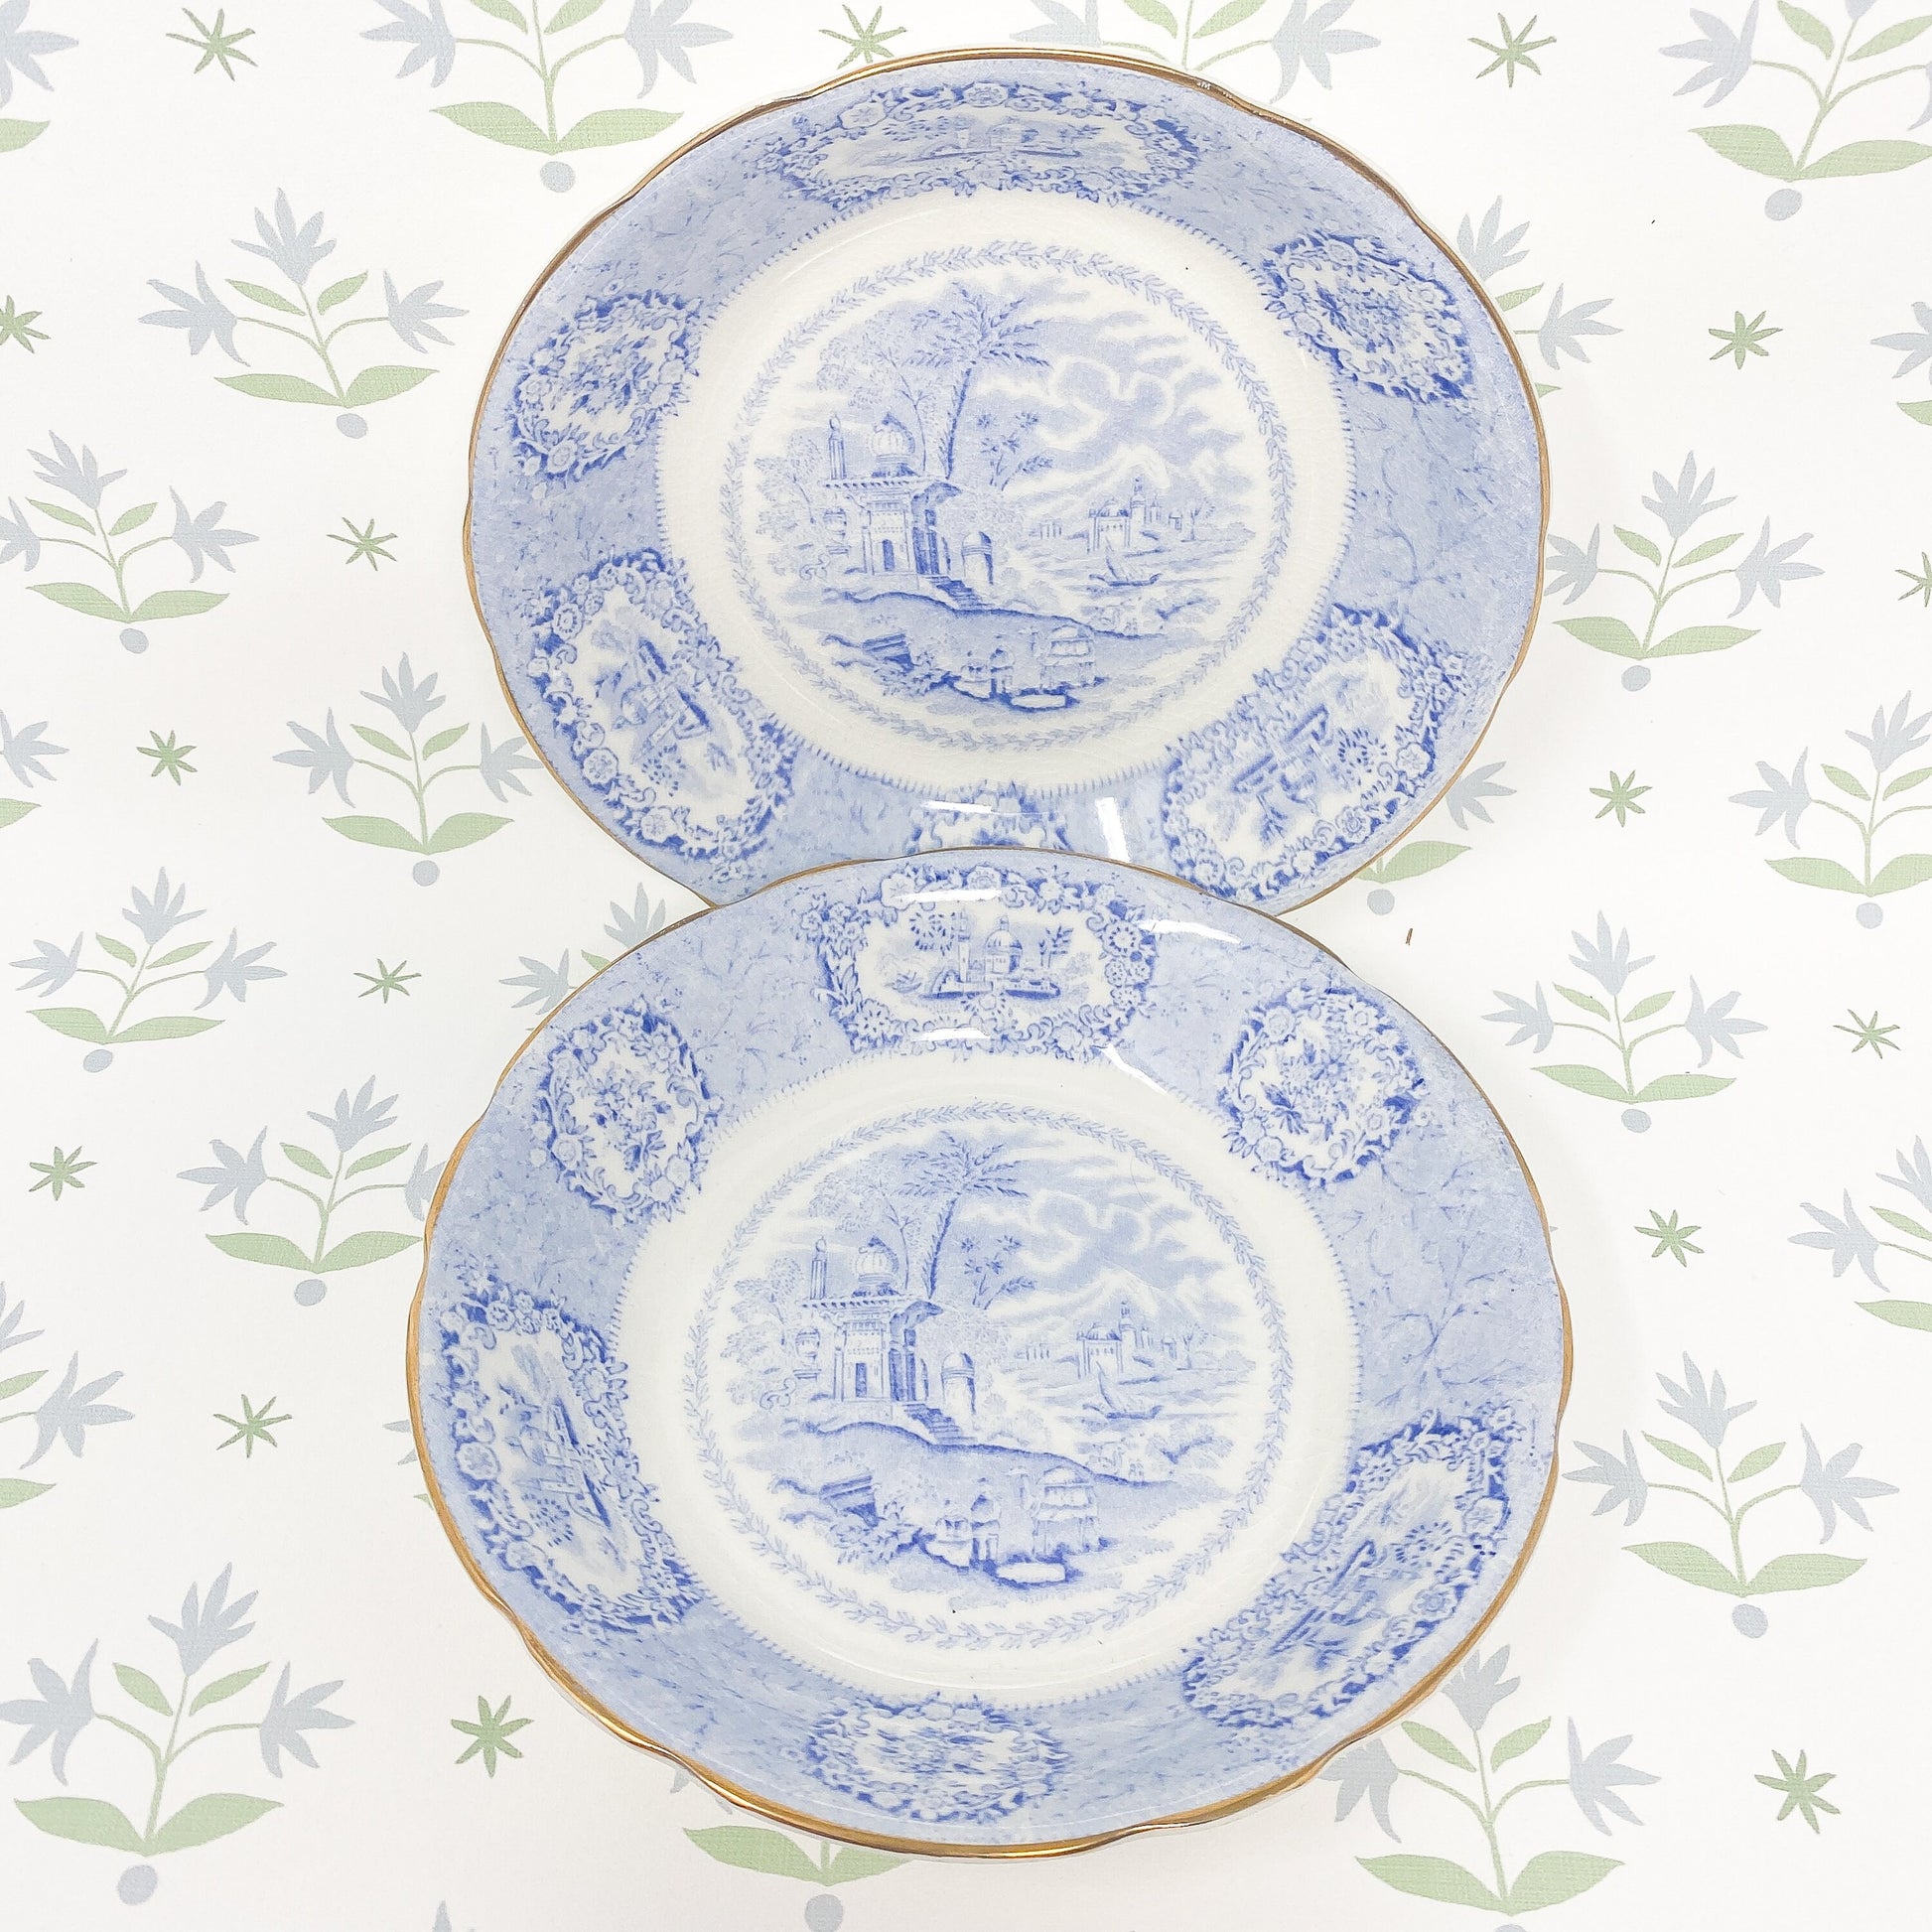 Pair of Antique Ridgway Oriental Staffordshire Bowls - c. 1890 - Blue and White Porcelain Transferware